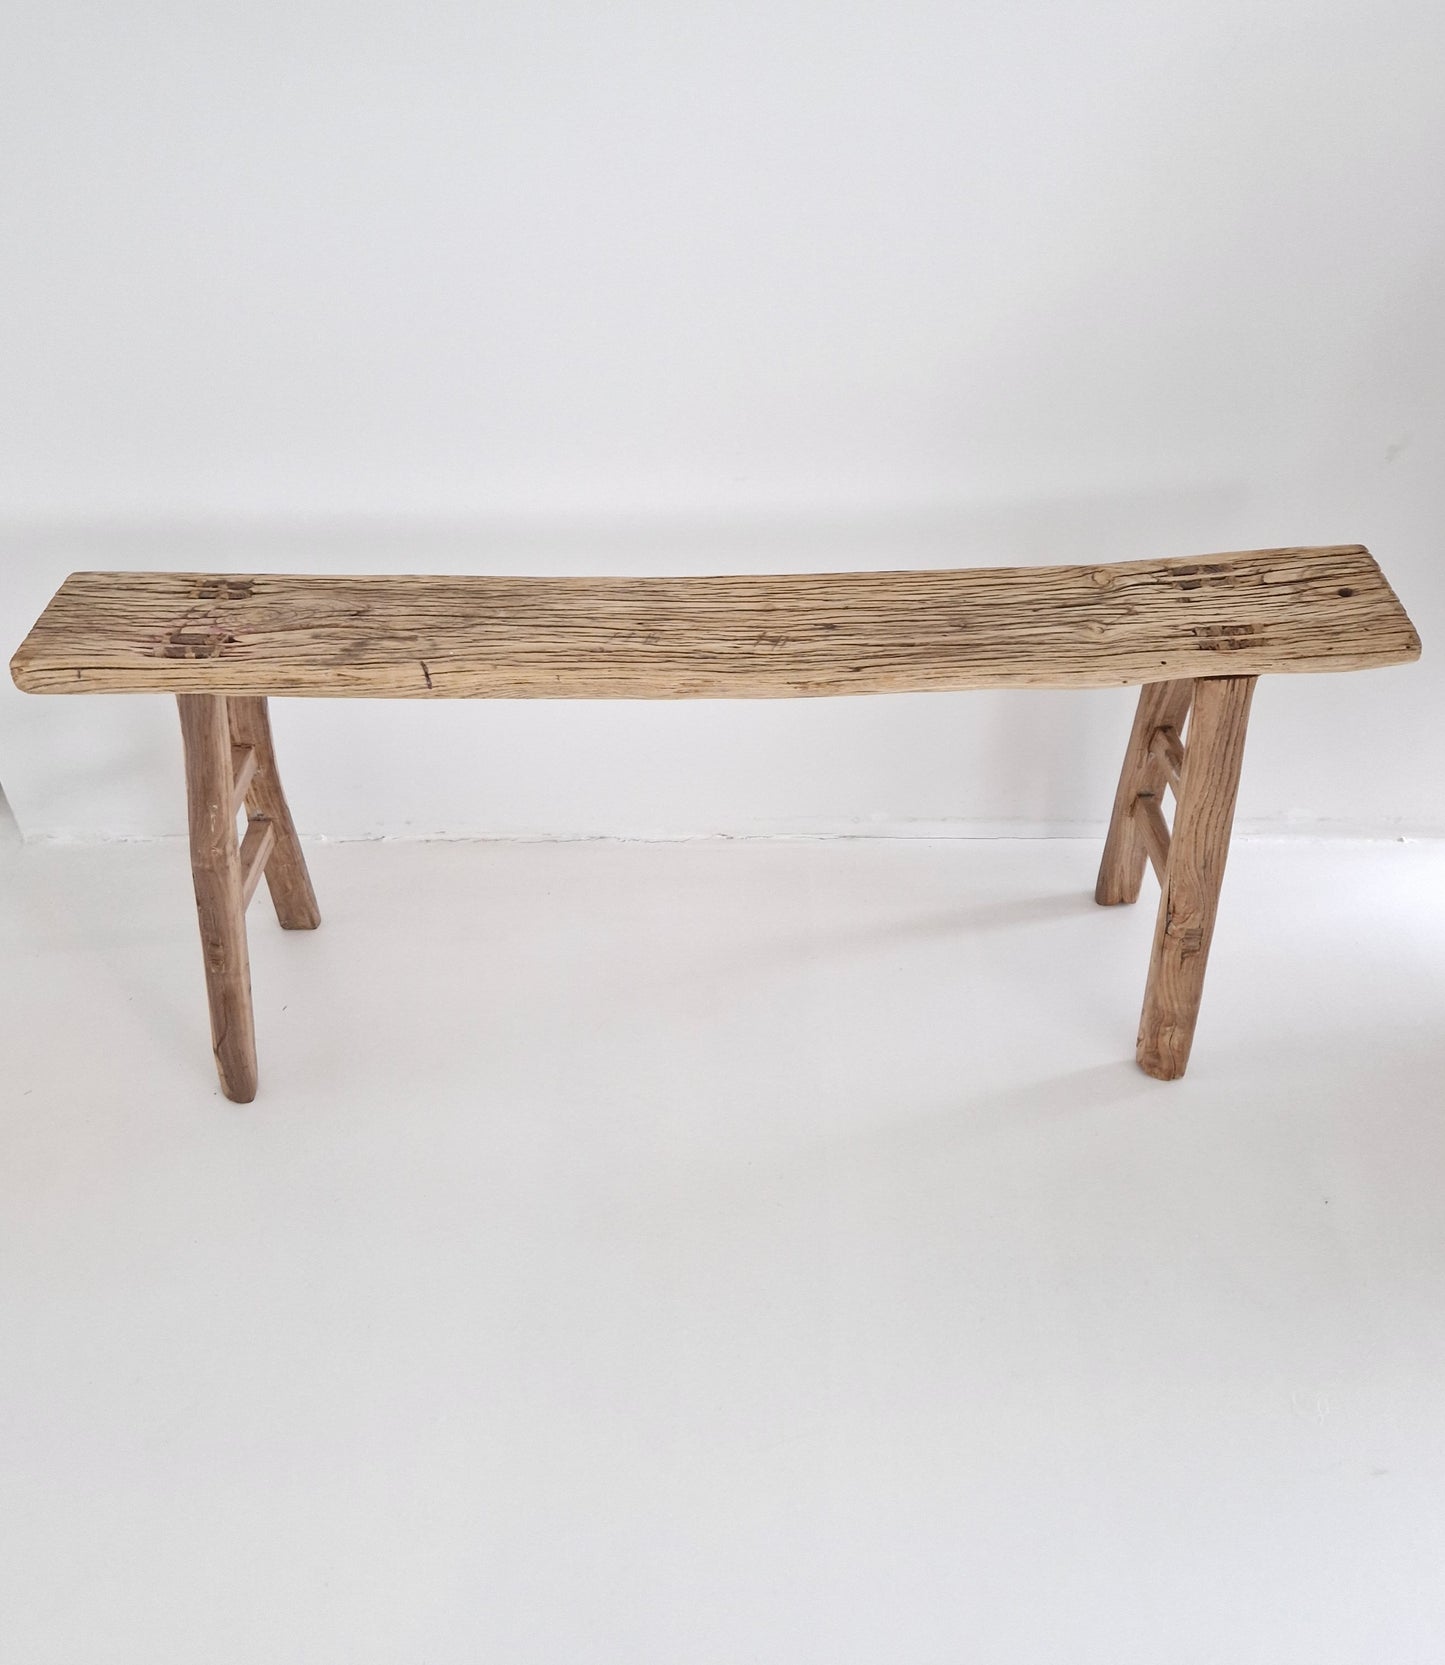 Old wooden bench #8 (115cm)